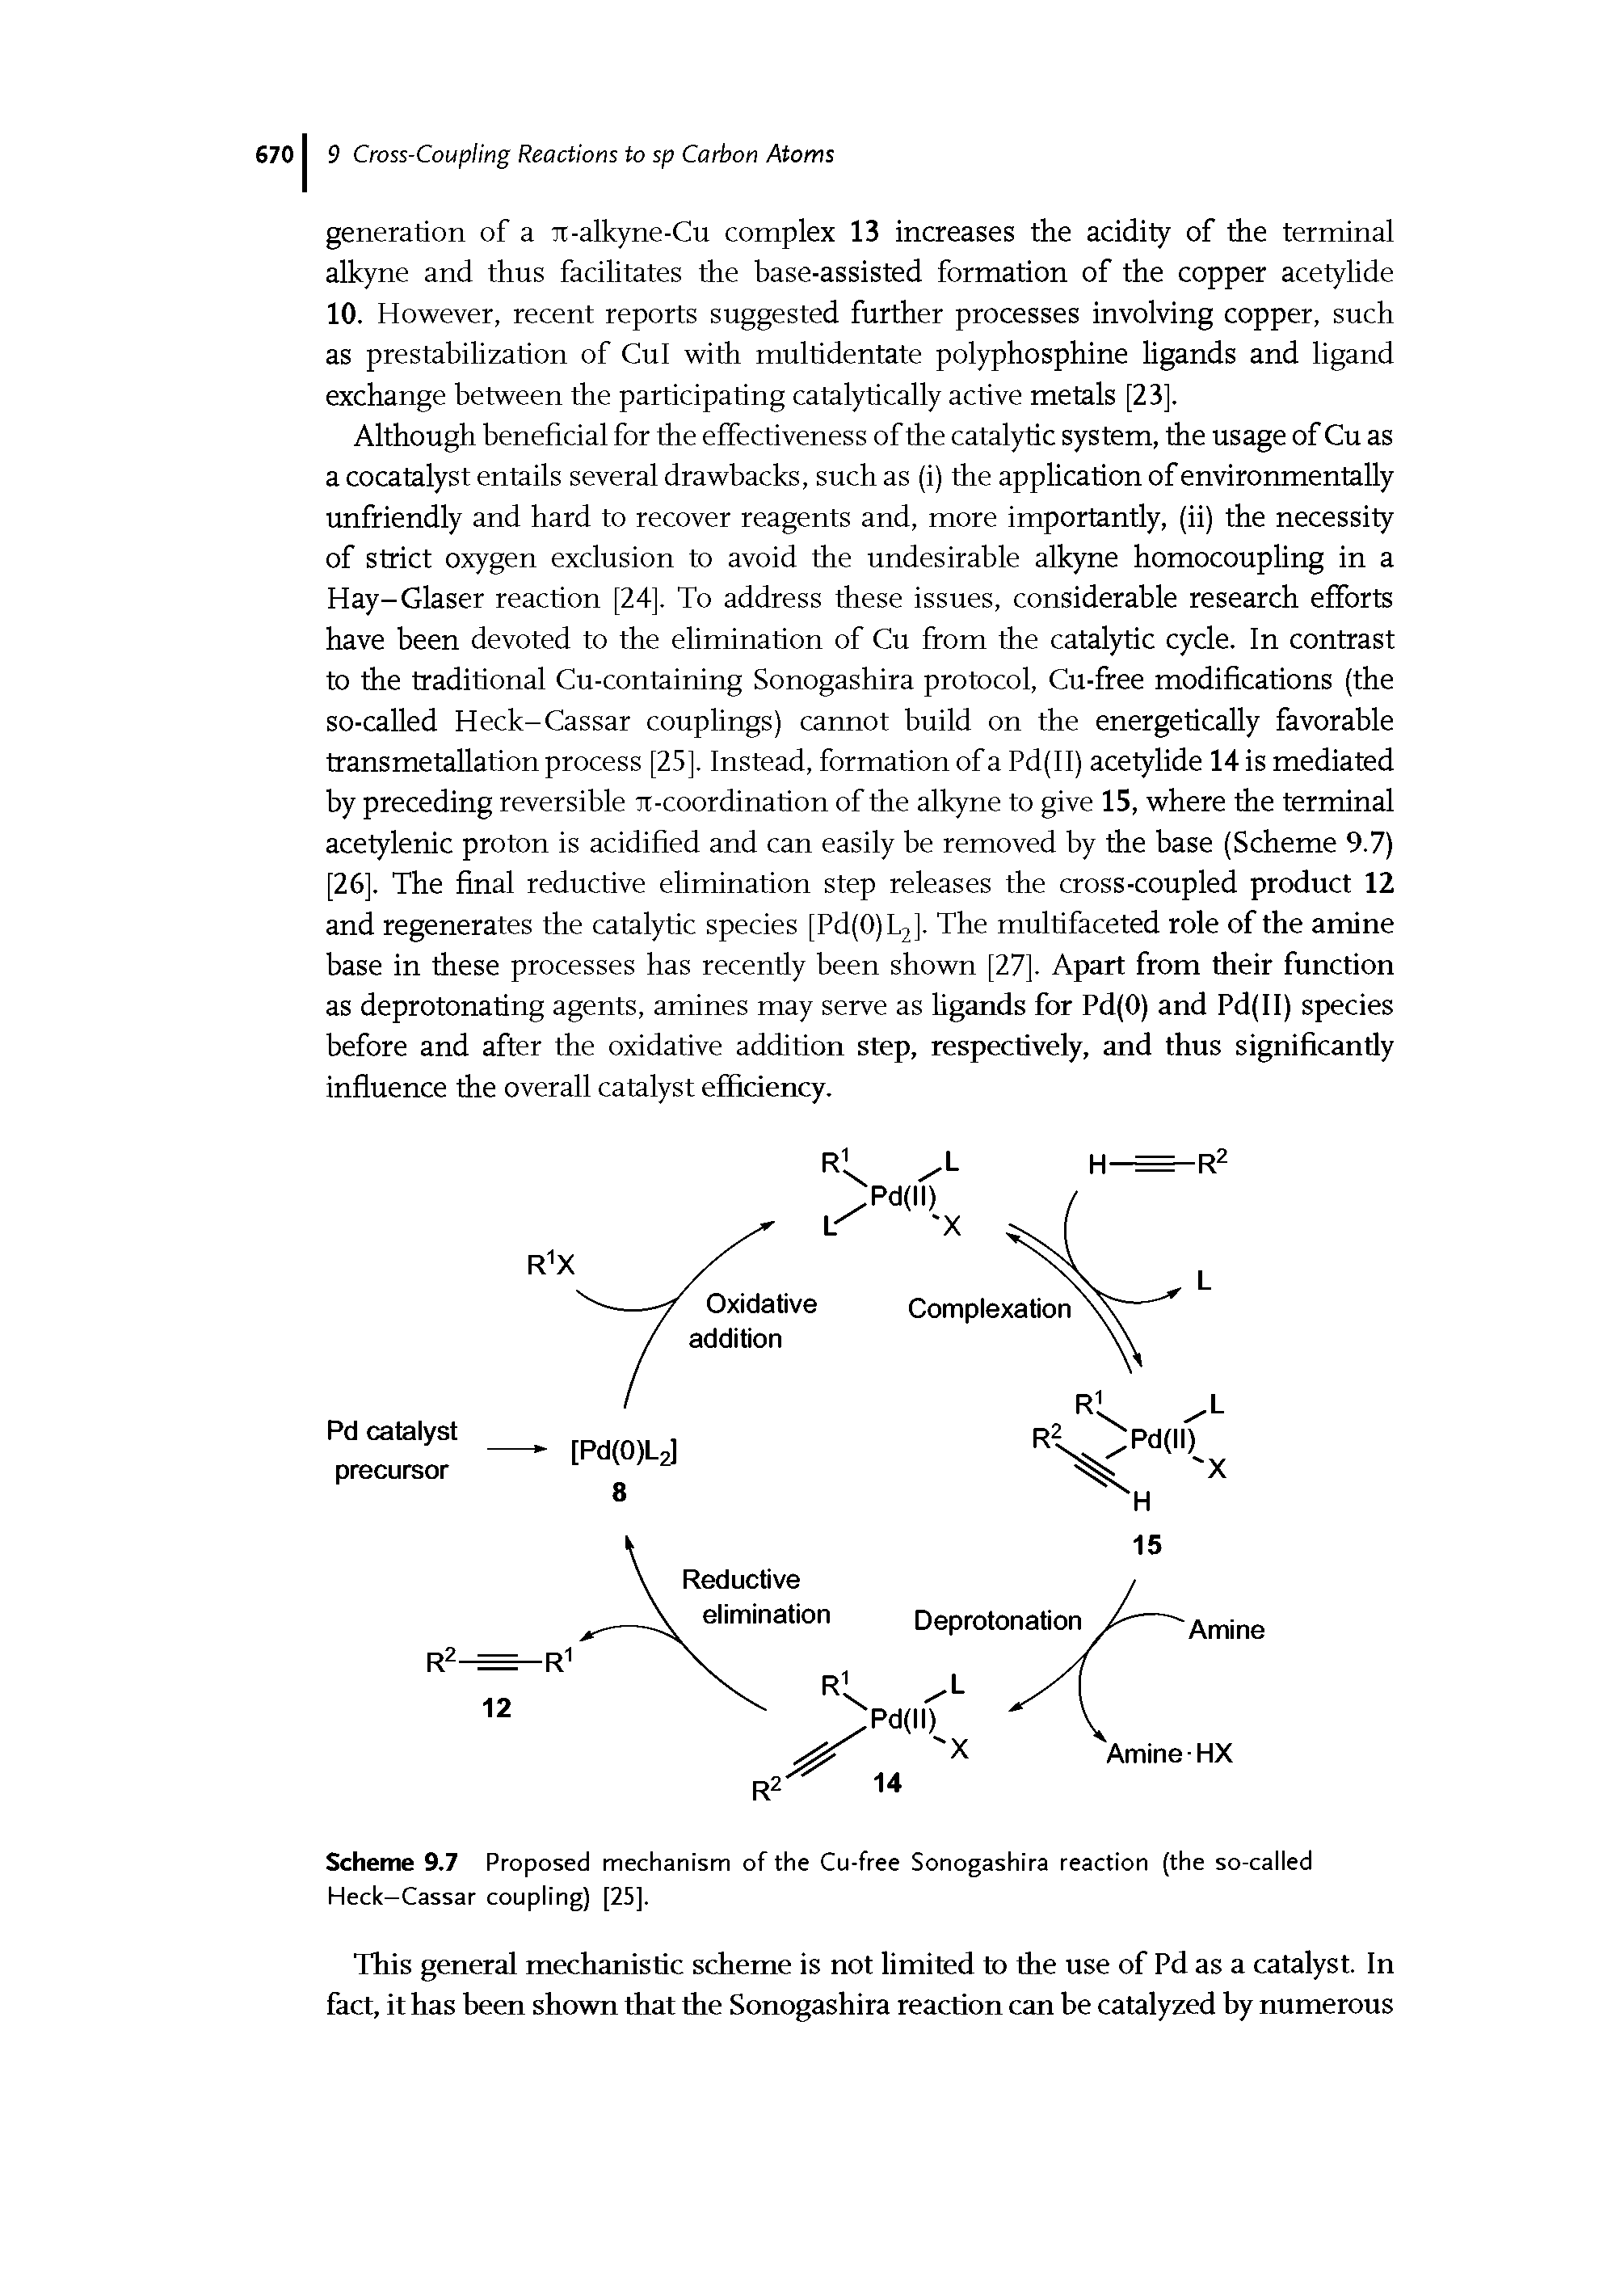 Scheme 9.7 Proposed mechanism of the Cu-free Sonogashira reaction (the so-called Heck-Cassar coupling) [25].